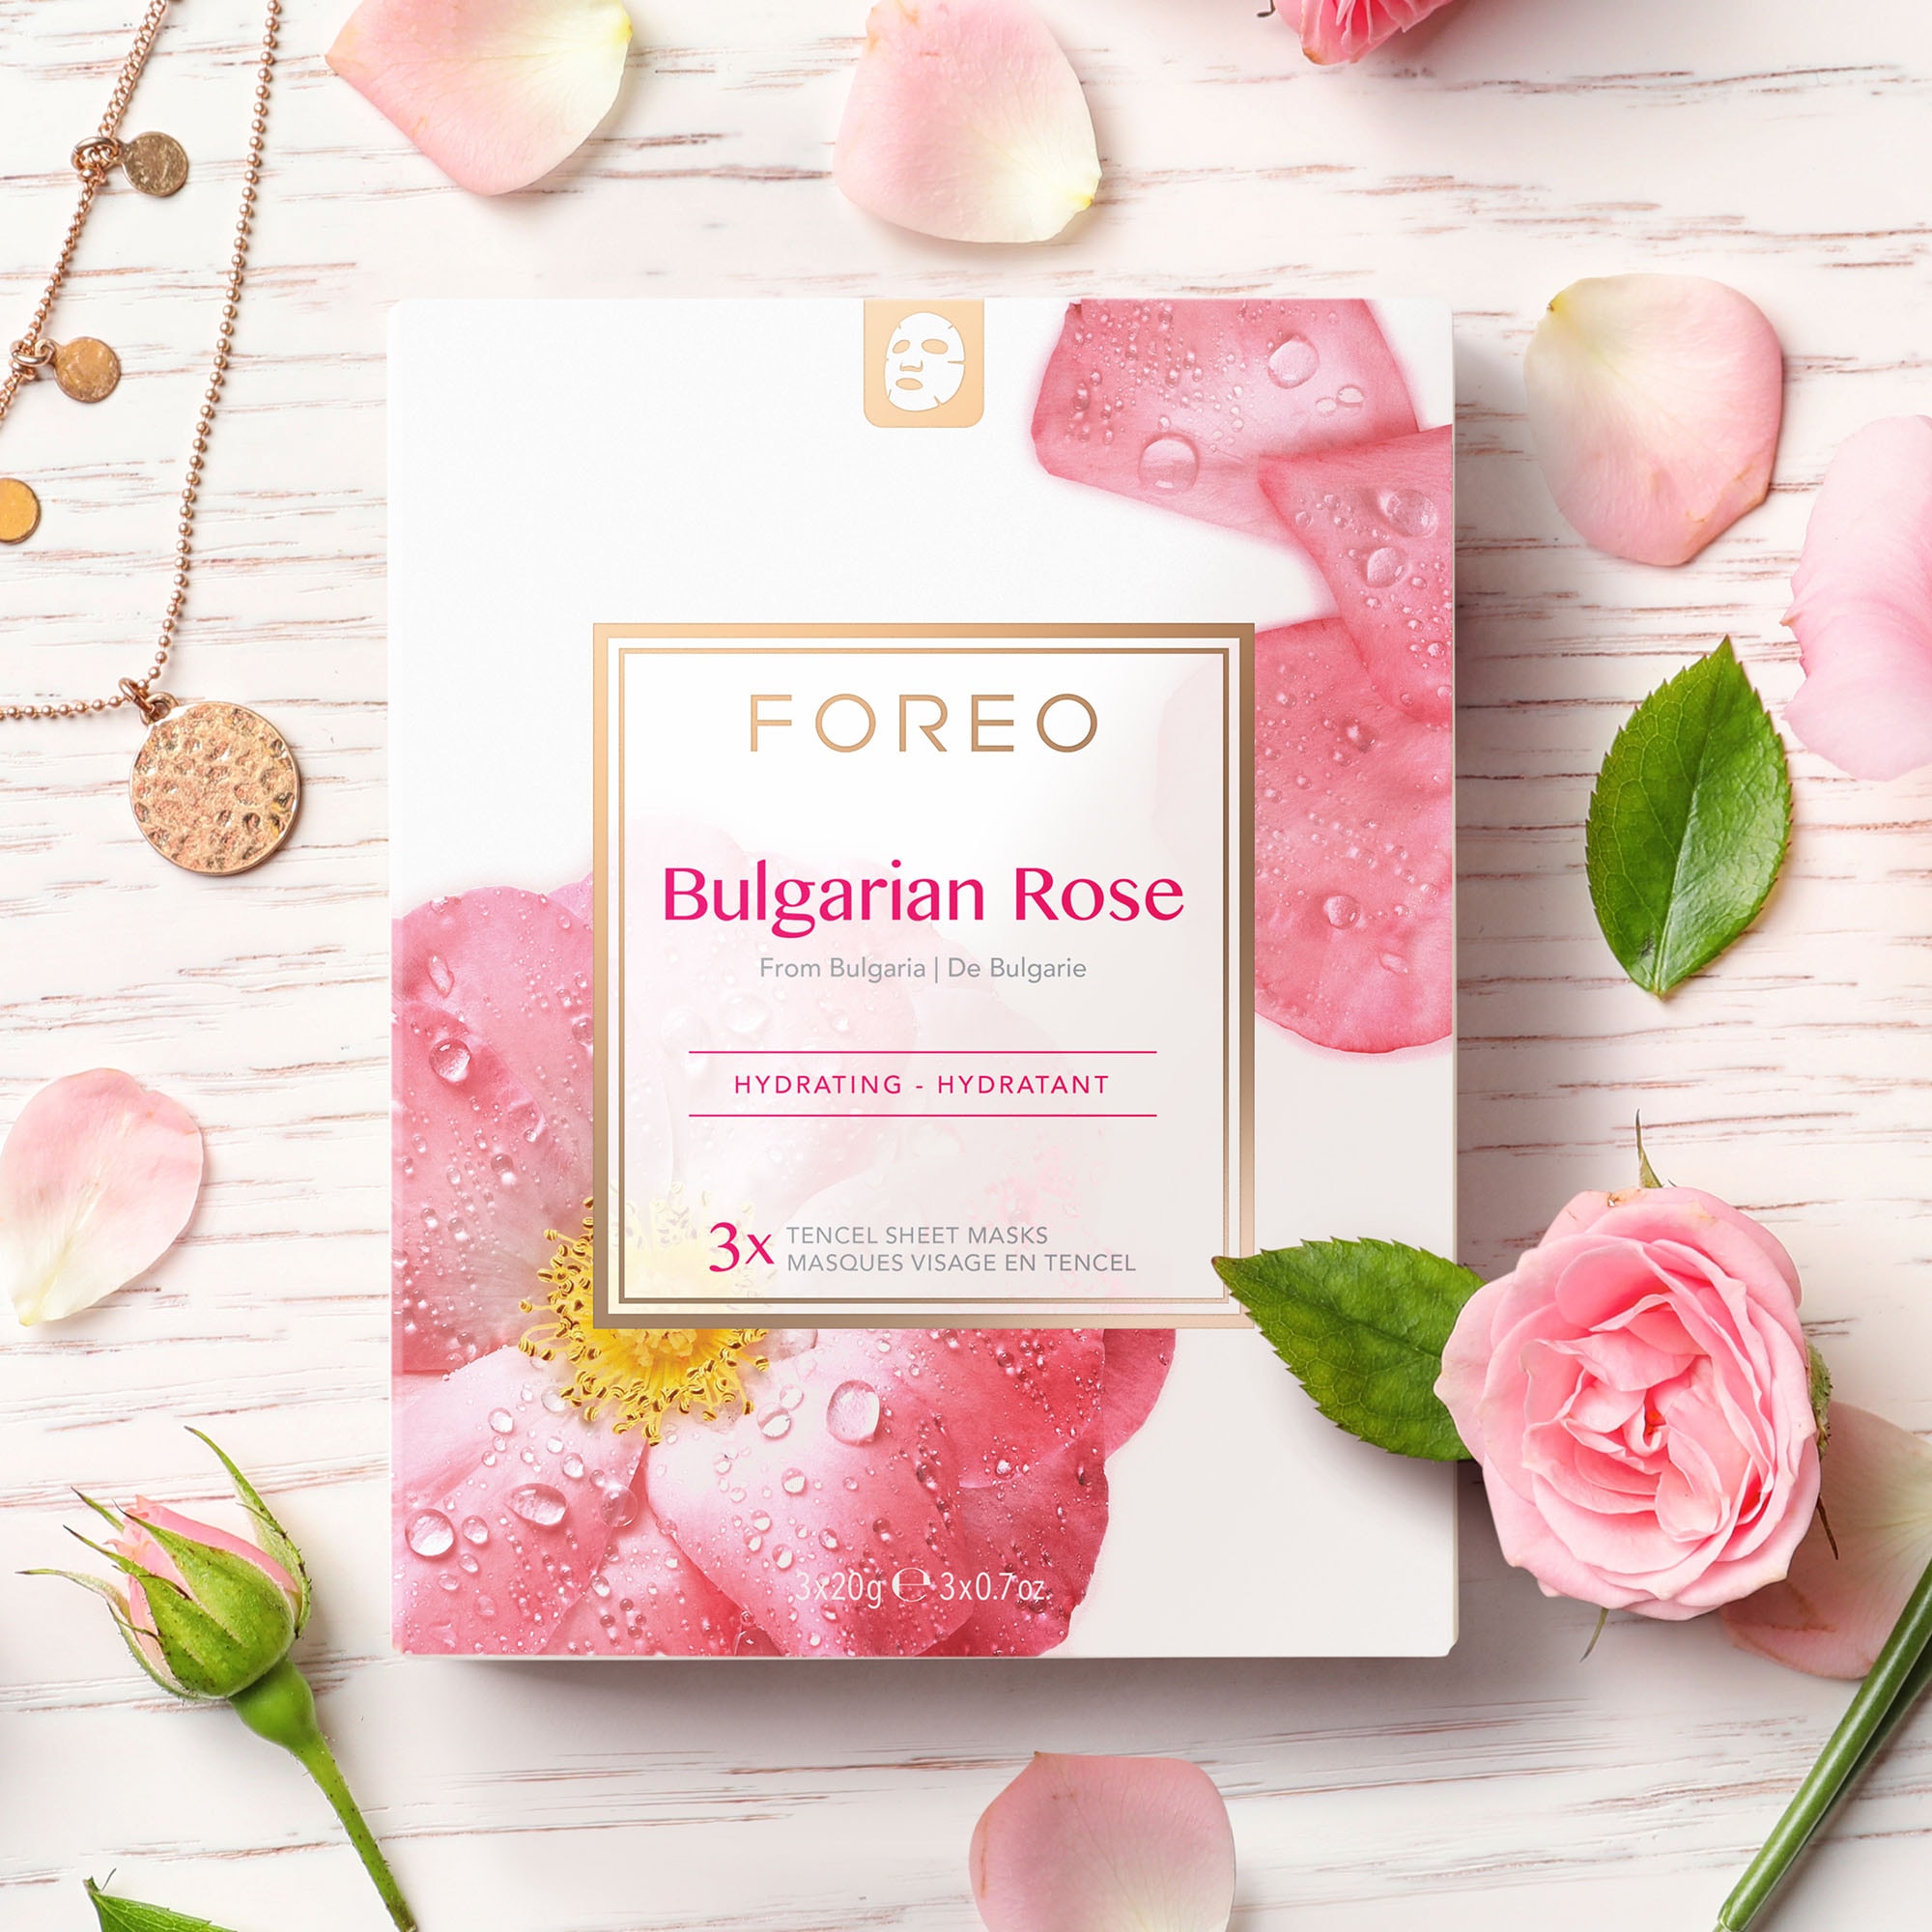 FOREO Gesichtsmaske »Farm To online Masks OTTO Sheet Bulgarian Collection Face bei Rose«, (3 tlg.)